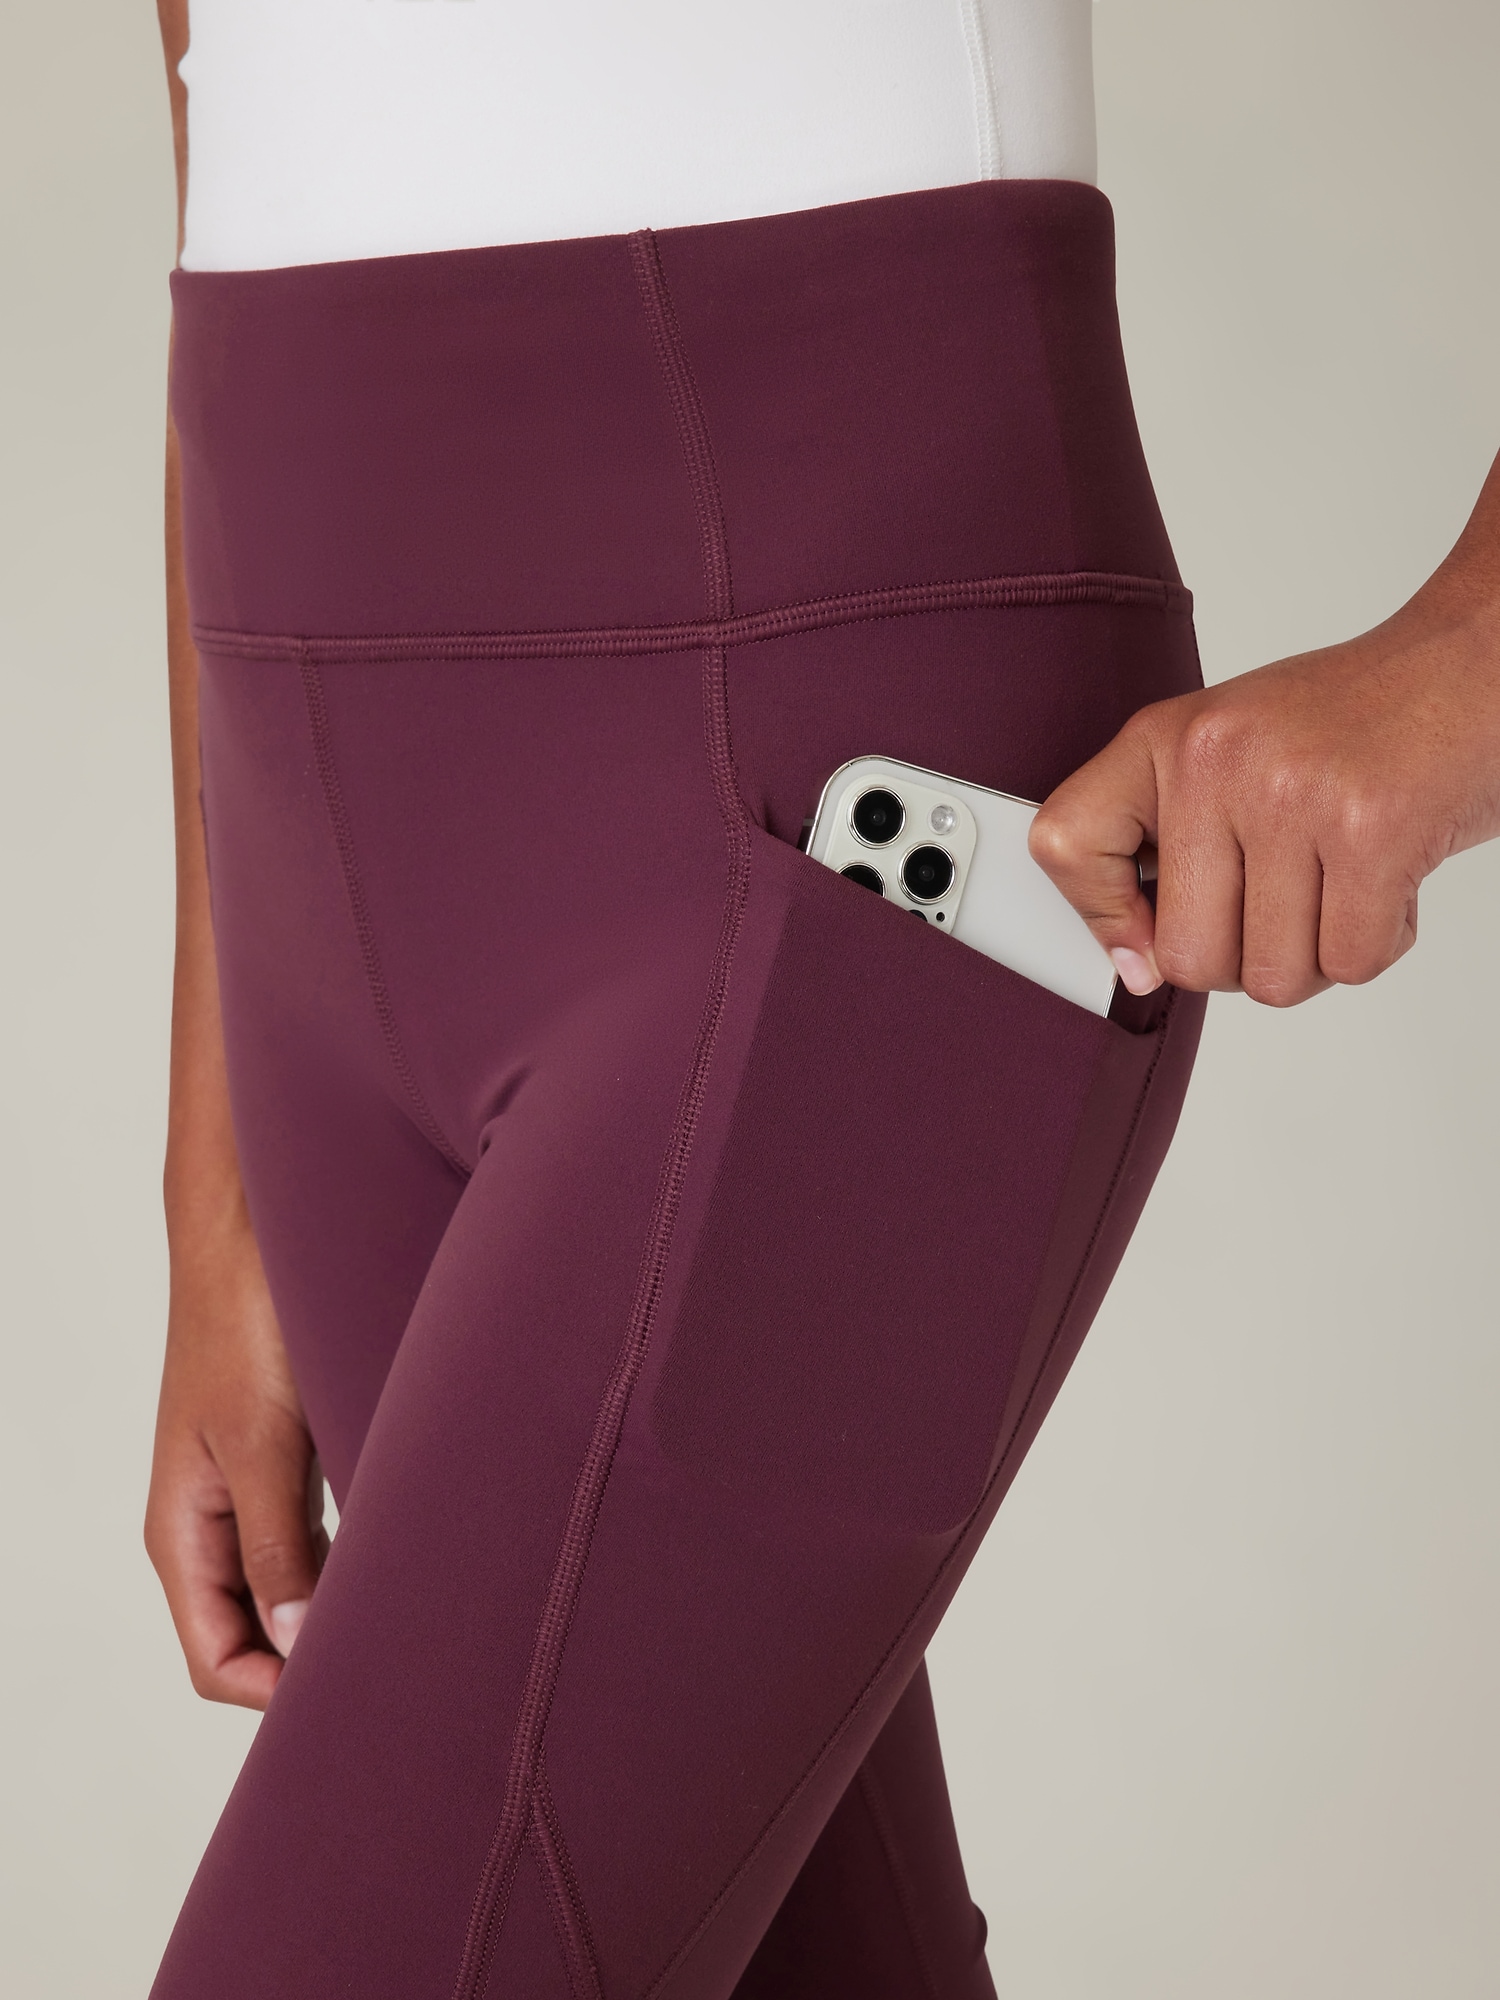 Athleta - *Insert some color* in your drawer full of black tights